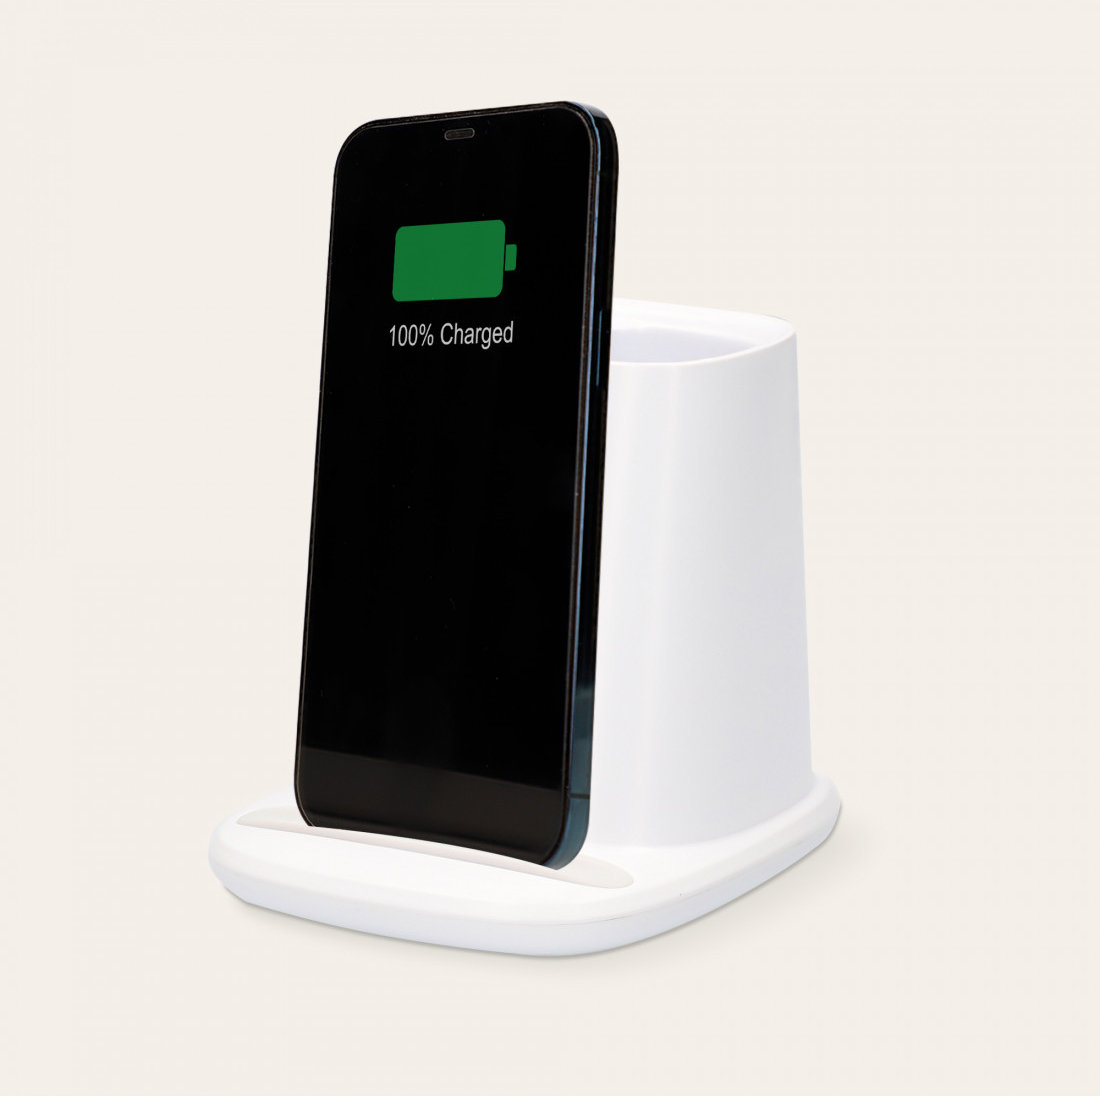 KSIX wireless charger